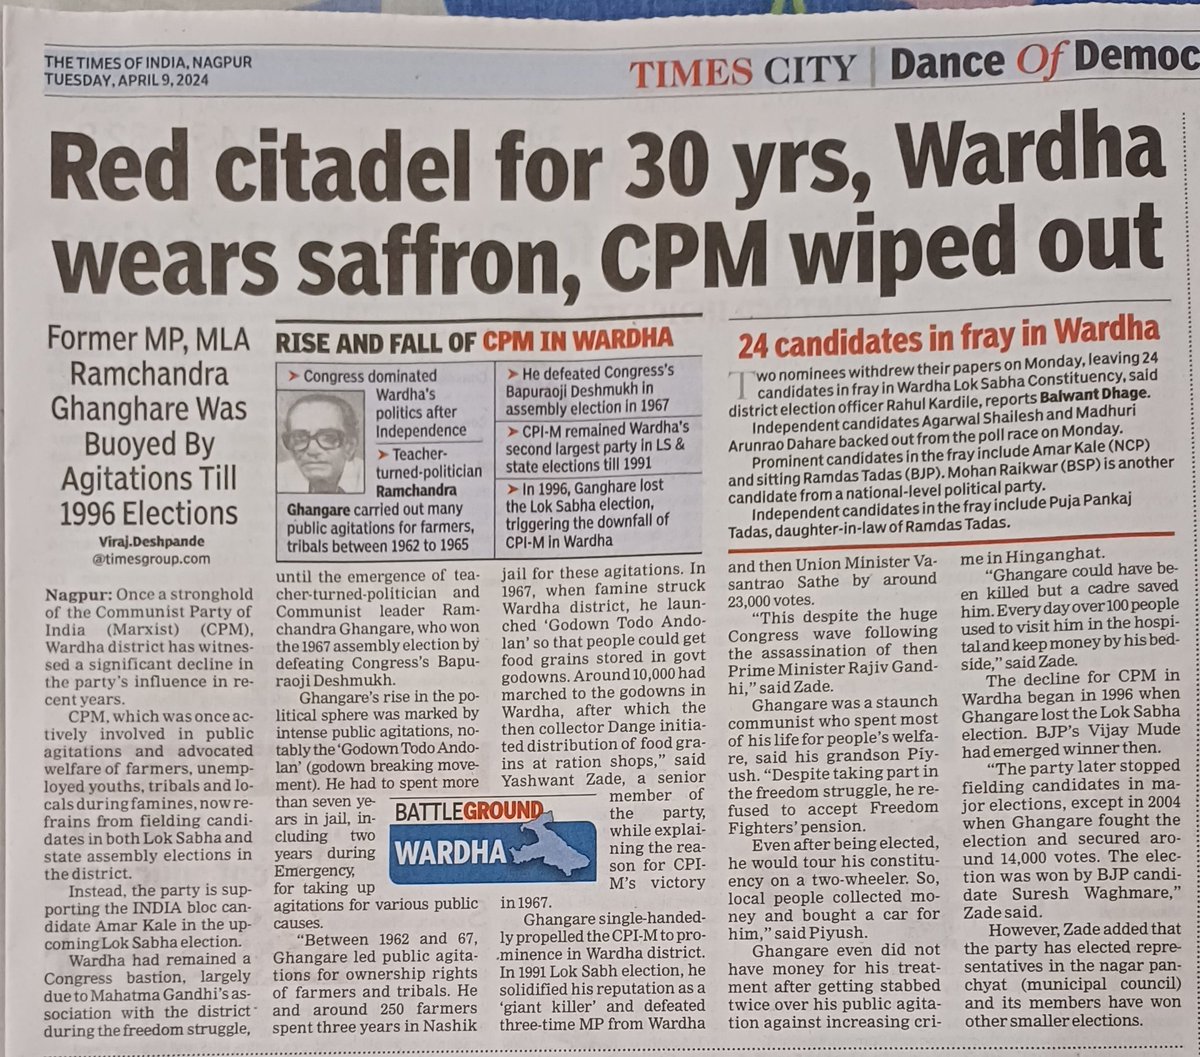 Wardha district was a bastion of CPI-M for over 30 years under communist leader Ramchandra Ghangare. The party dominated Wardha politics owing to Public agitations and andolans. It also managed to defeat Congress However CPIM now has been wiped out from district. #TOINagpur #CPI